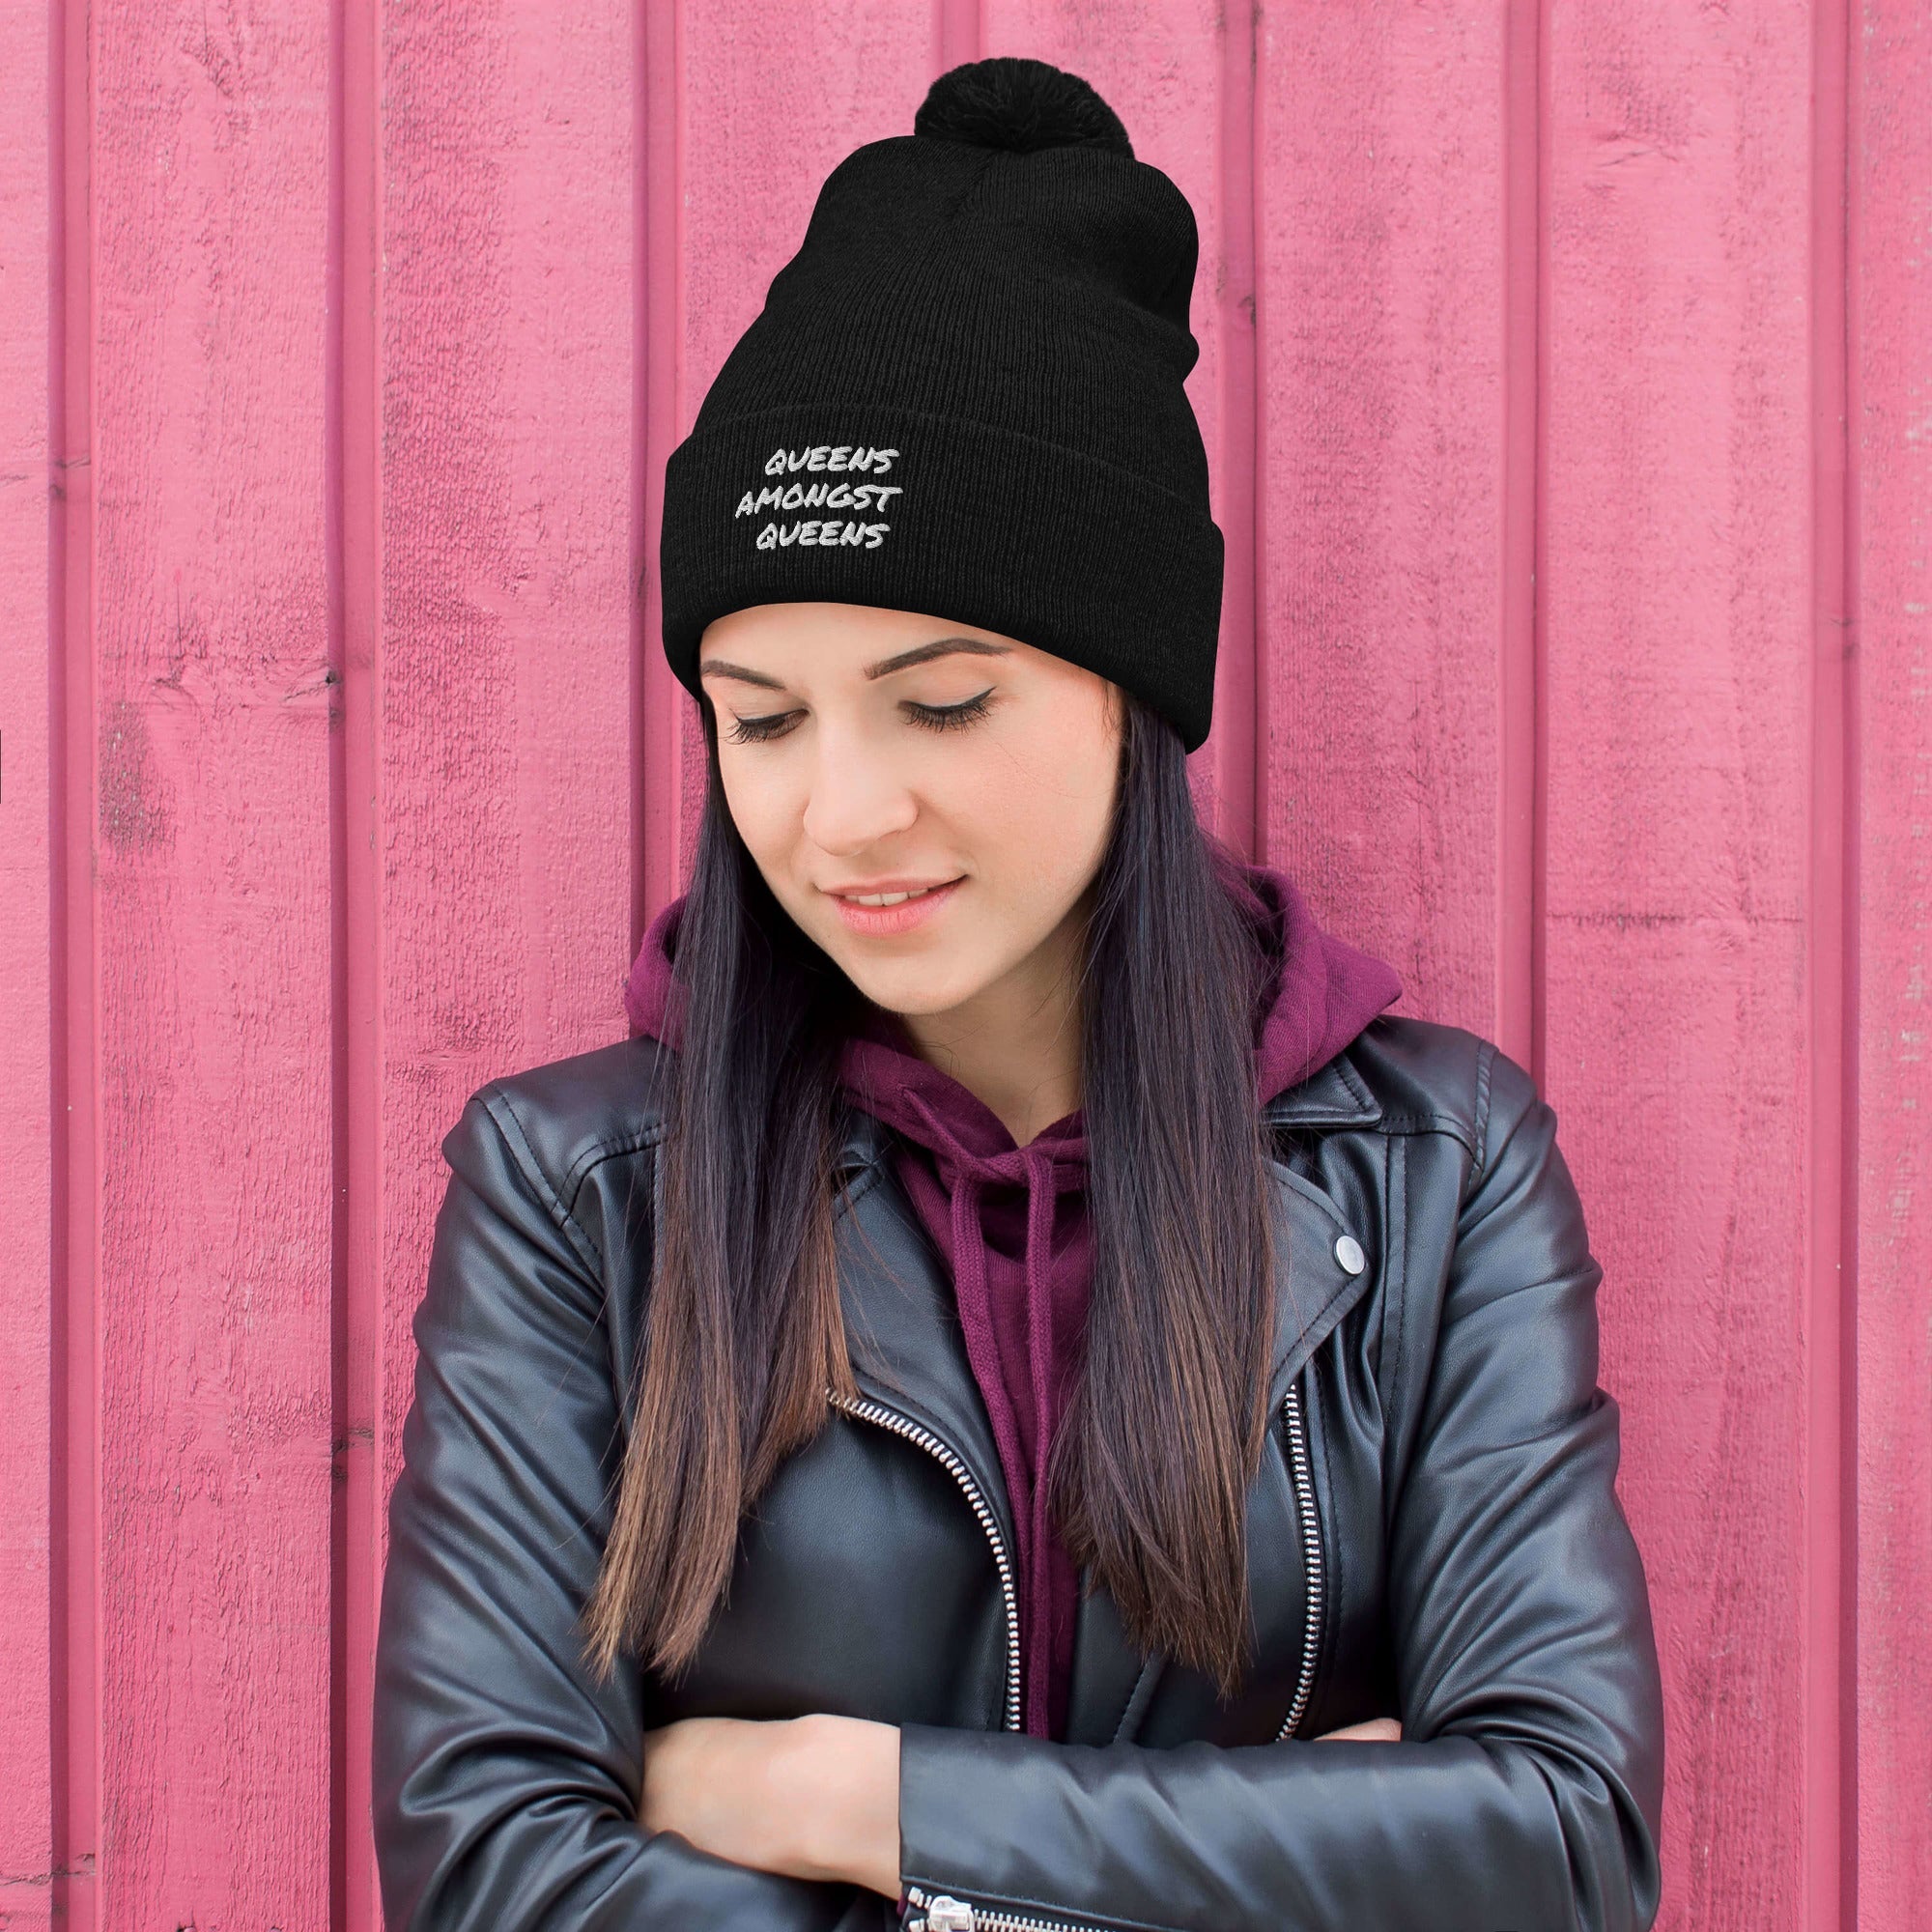 QUEENS AMONGST QUEENS Pom-Pom Beanie - MobbMall